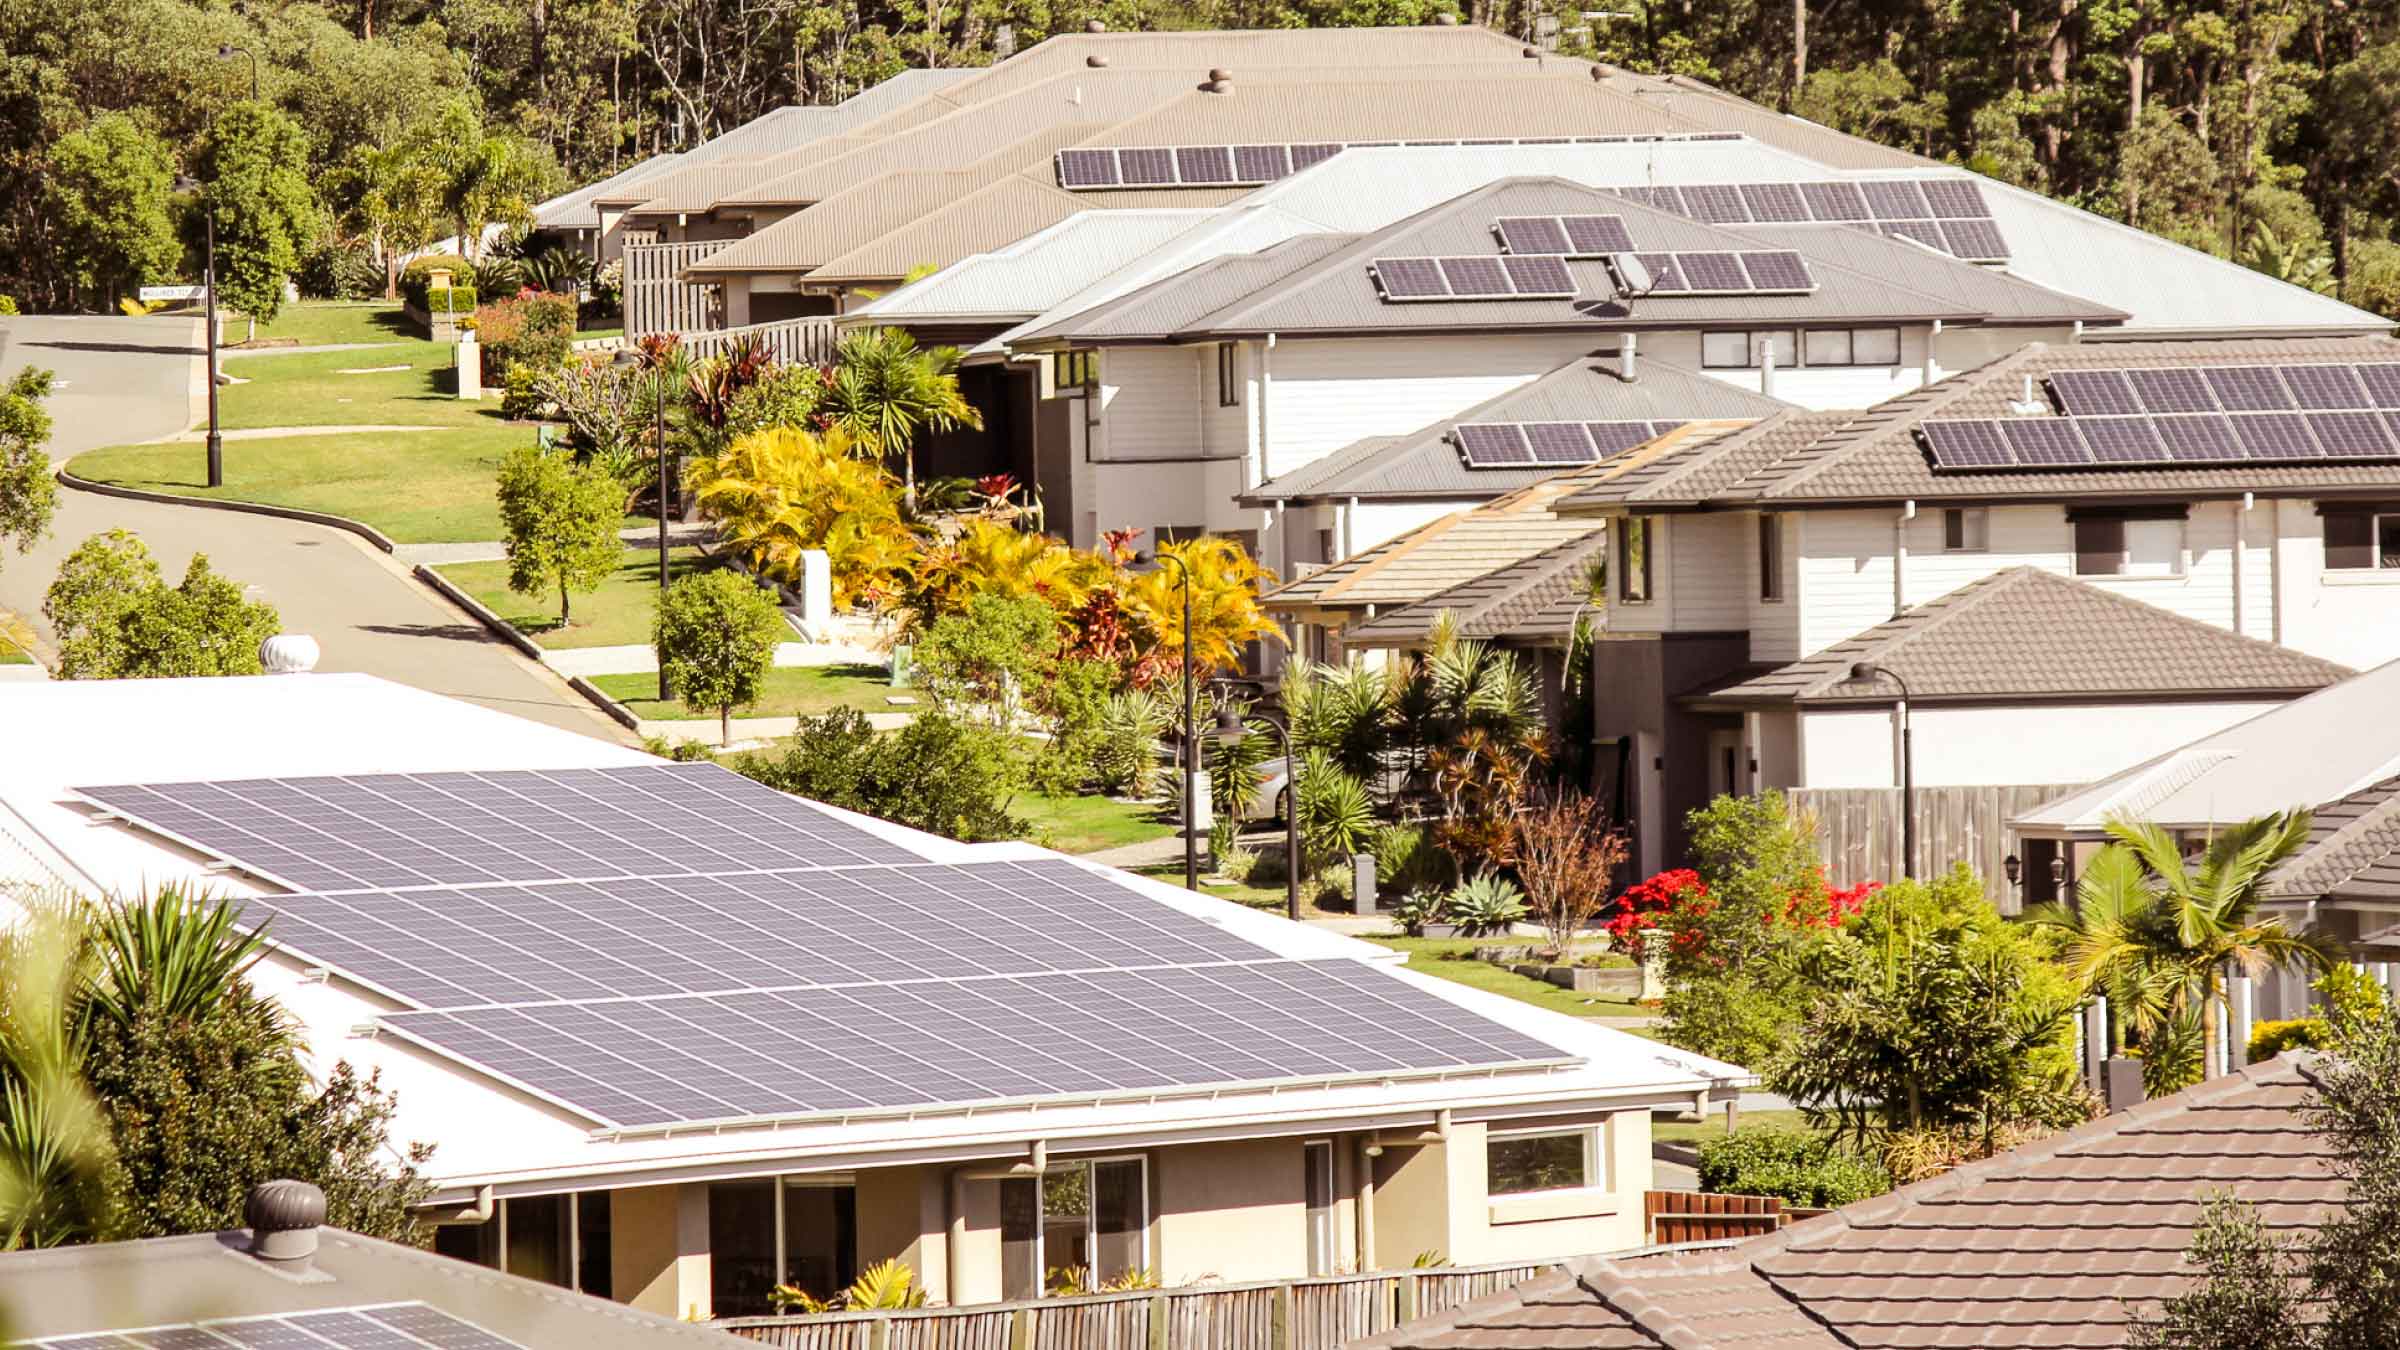 Suburban street, lined with bungalows, the majority of them have solar panels installed. Surrounded by green trees and bushland.